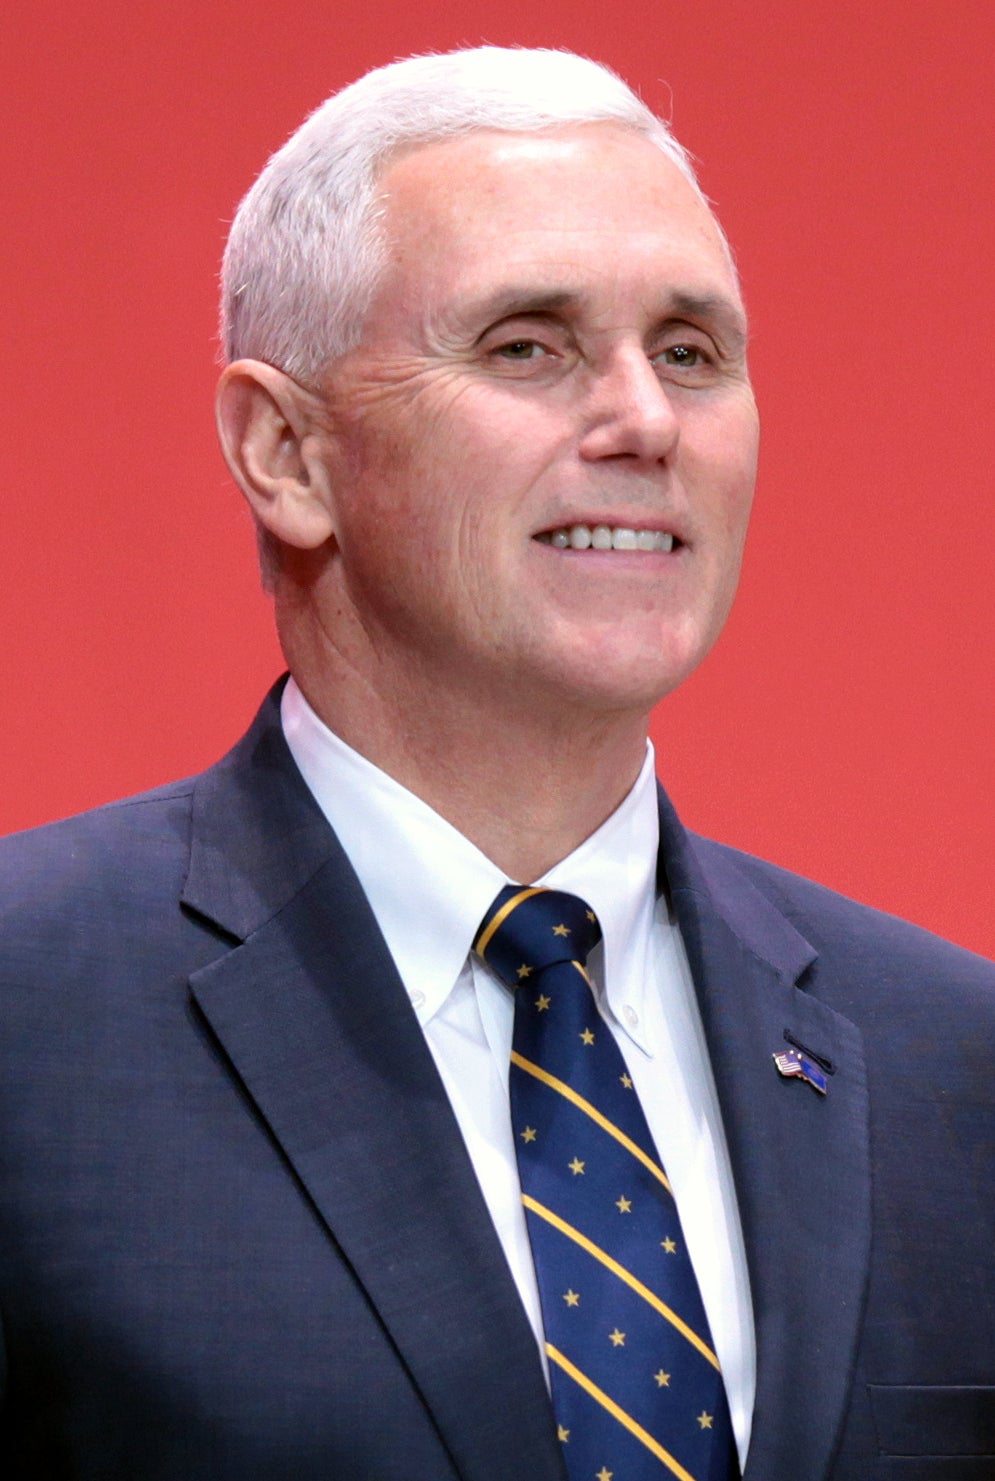 Trump VP Choice Mike Pence Doesn’t Agree With Science